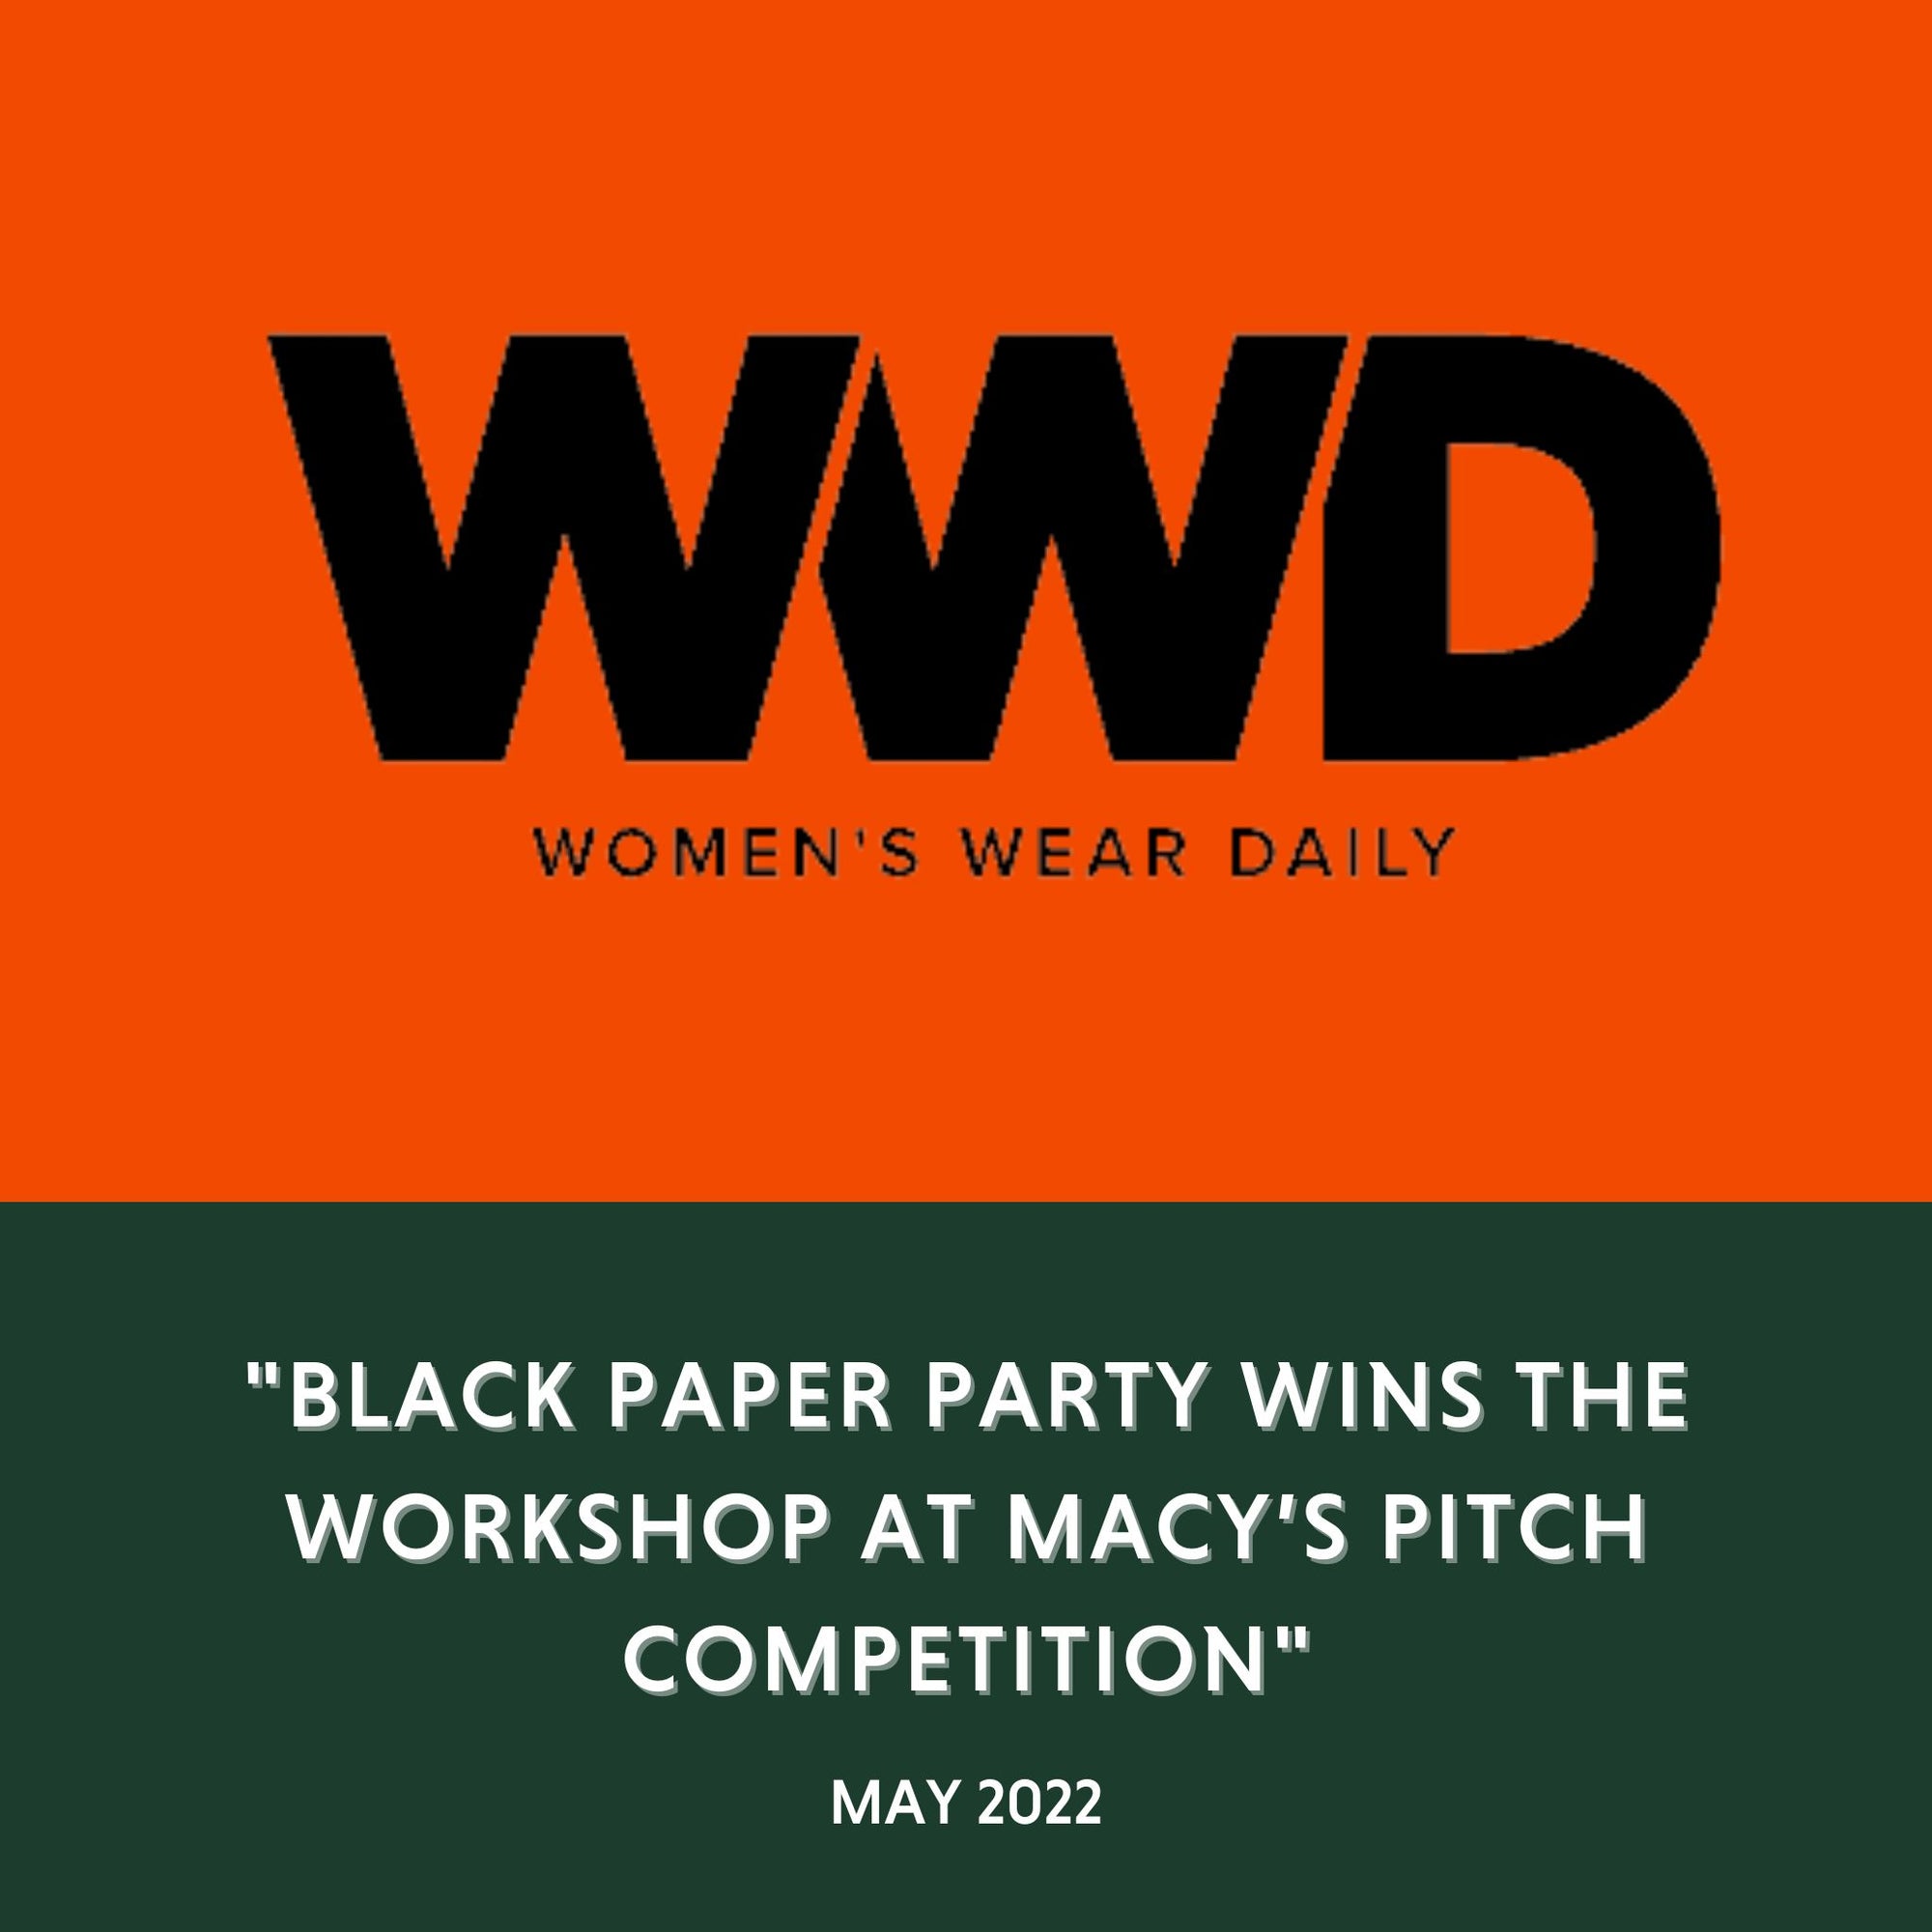 Womens Wear Daily - "Black Paper Party Wins The Workshop at Macy’s Pitch Competition" - May 2022